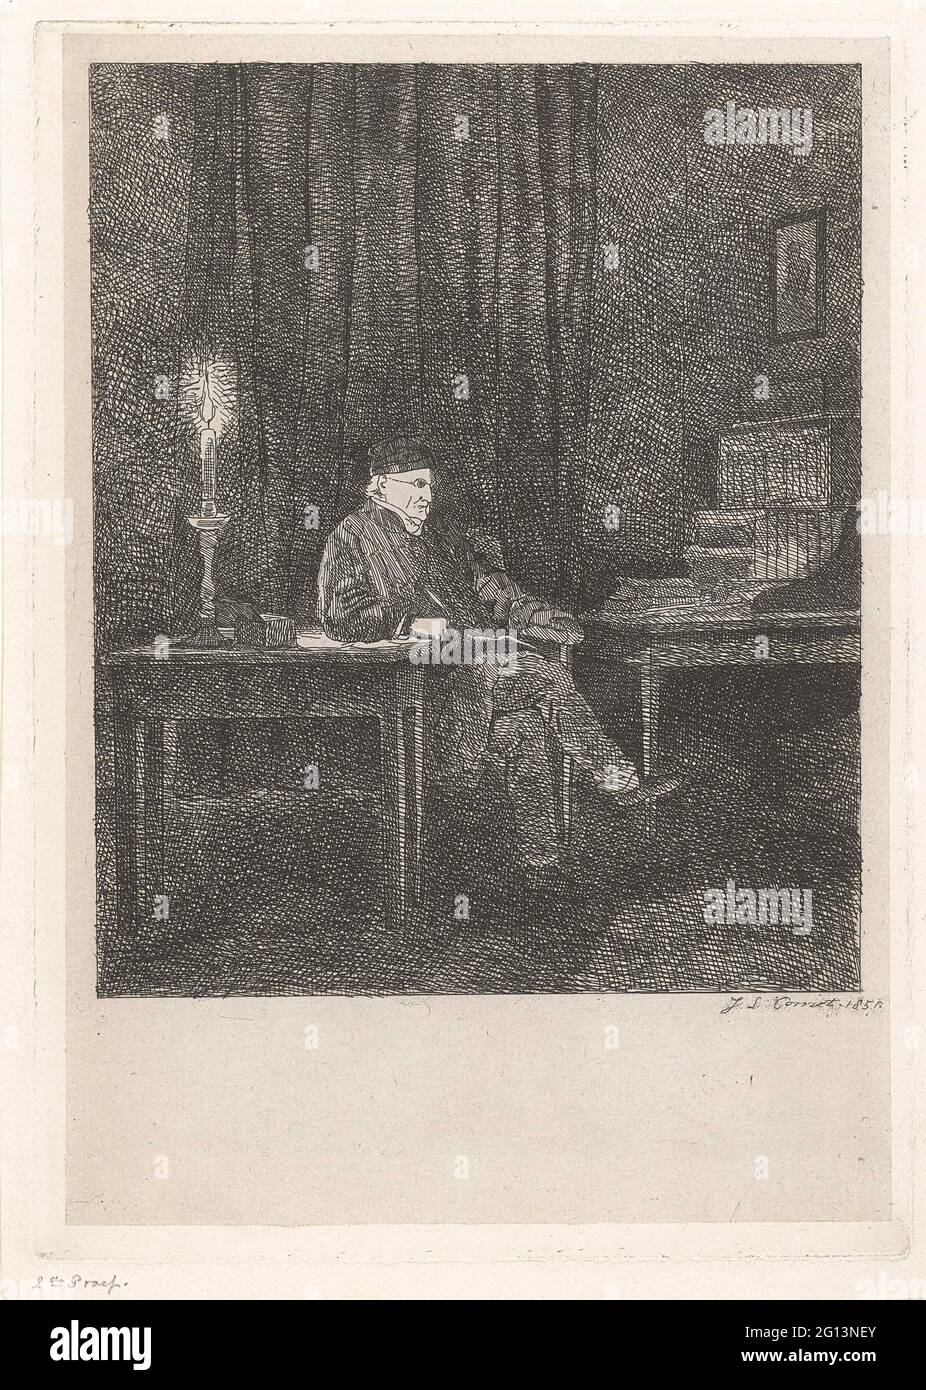 Portrait of humbert de superville. Portrait of David Pierre Giottino Humbert de Superville, an artist and art collector. Humbert de Superville is sitting at his desk. The room is only lit by a candle. Stock Photo